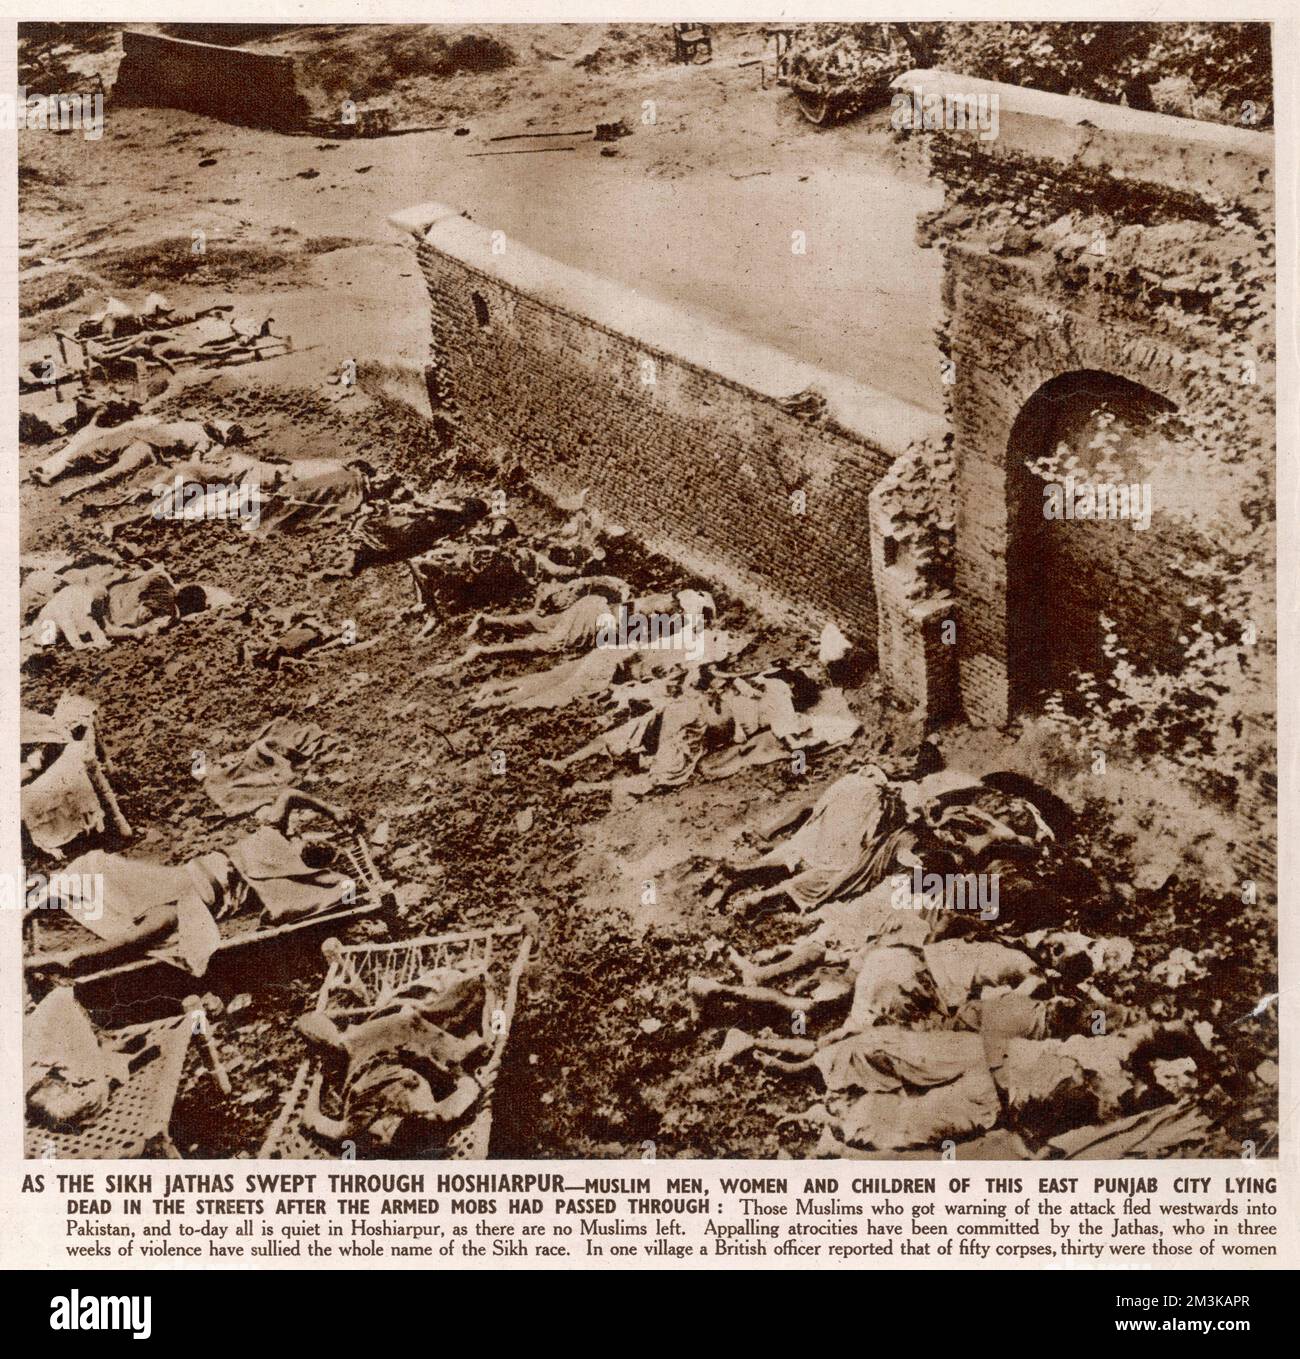 One of the devastating results of the ensuing violence between Sikhs and Muslims following Partition of India in 1947; Muslim men, women and children lying dead in the streets after the armed mobs of Sikh Jathas had passed through the town of Hoshiarpur in East Punjab.  1947 Stock Photo